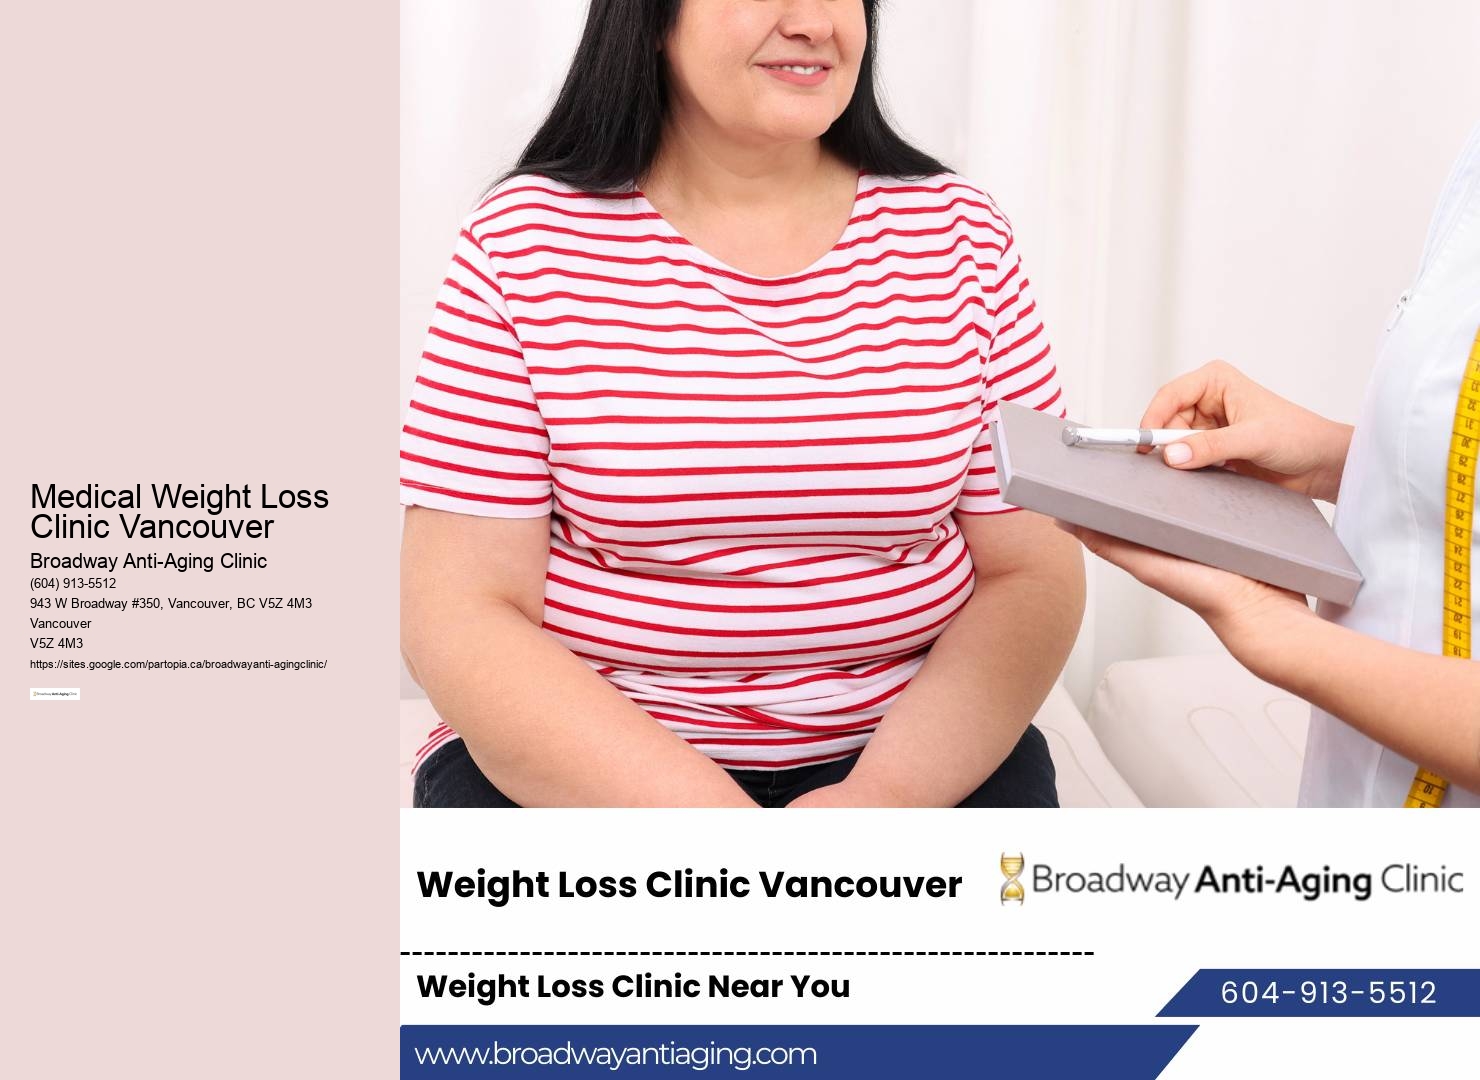 Weight loss clinic North Vancouver open now